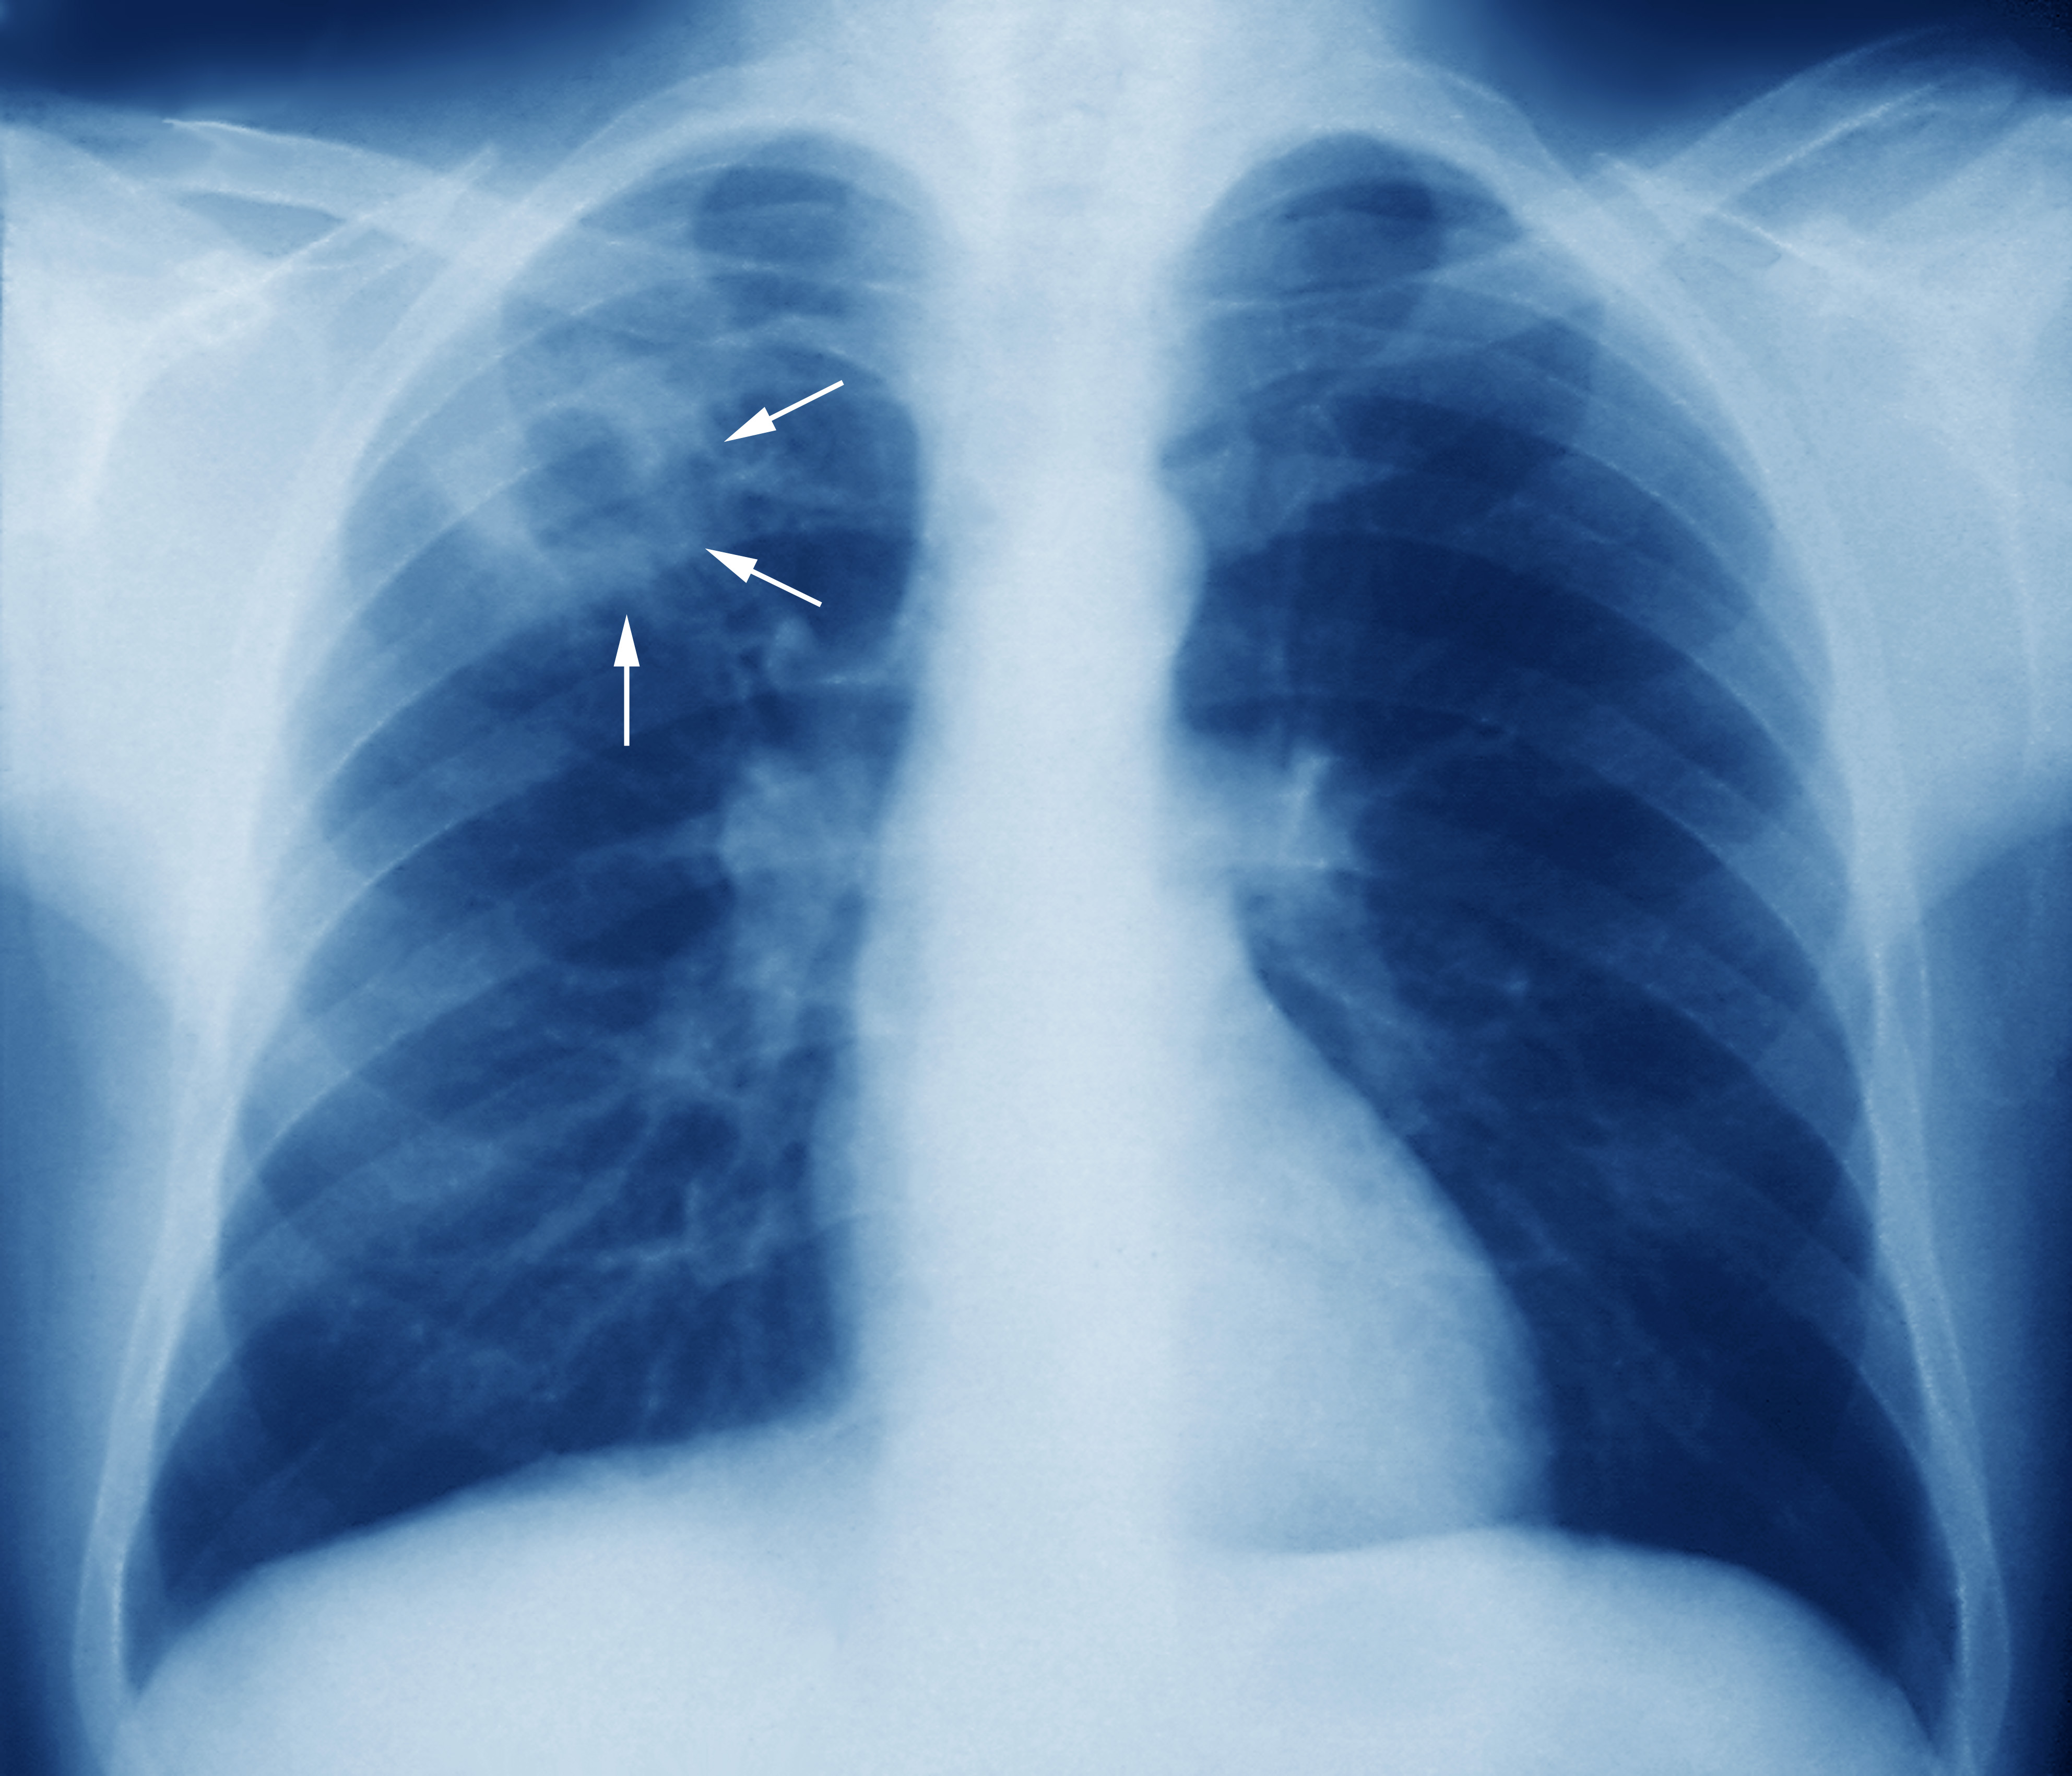 https://terveytta.net/wp-content/uploads/2020/12/m2700245-tuberculosis-chest-x-ray-science-photo-library-high.jpg